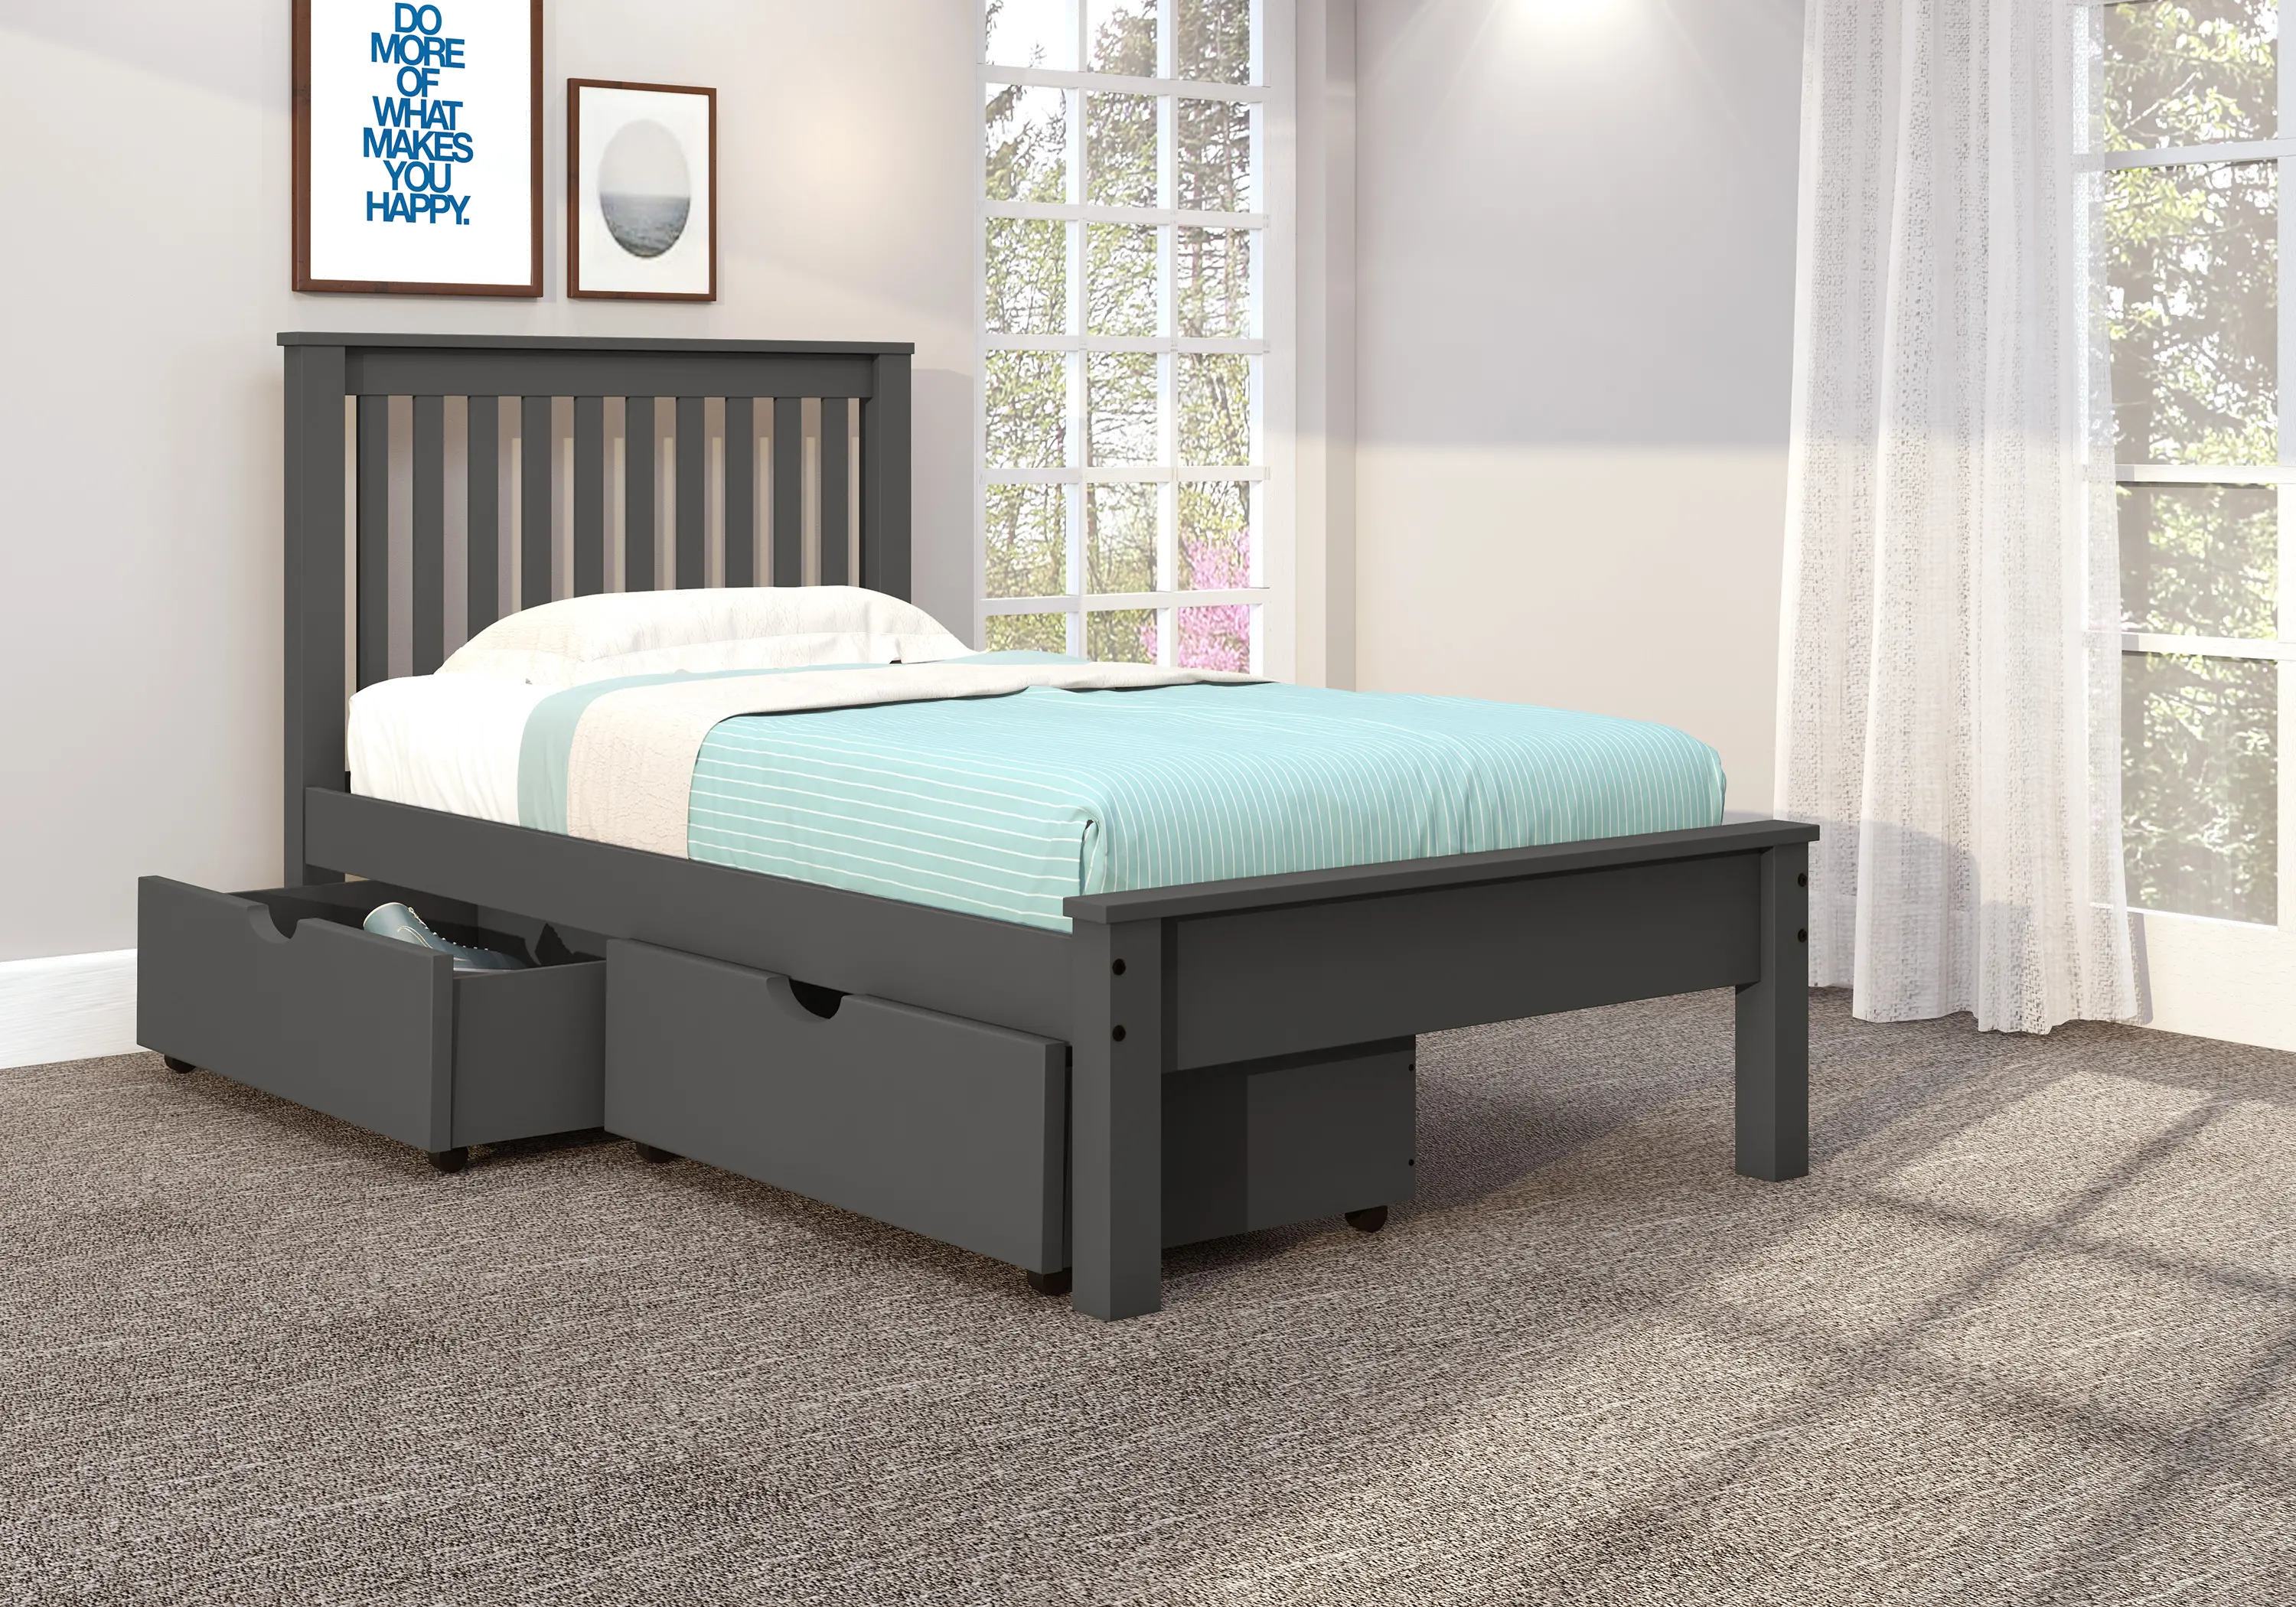 Carson Dark Gray Twin Bed with Dual Underbed Drawers